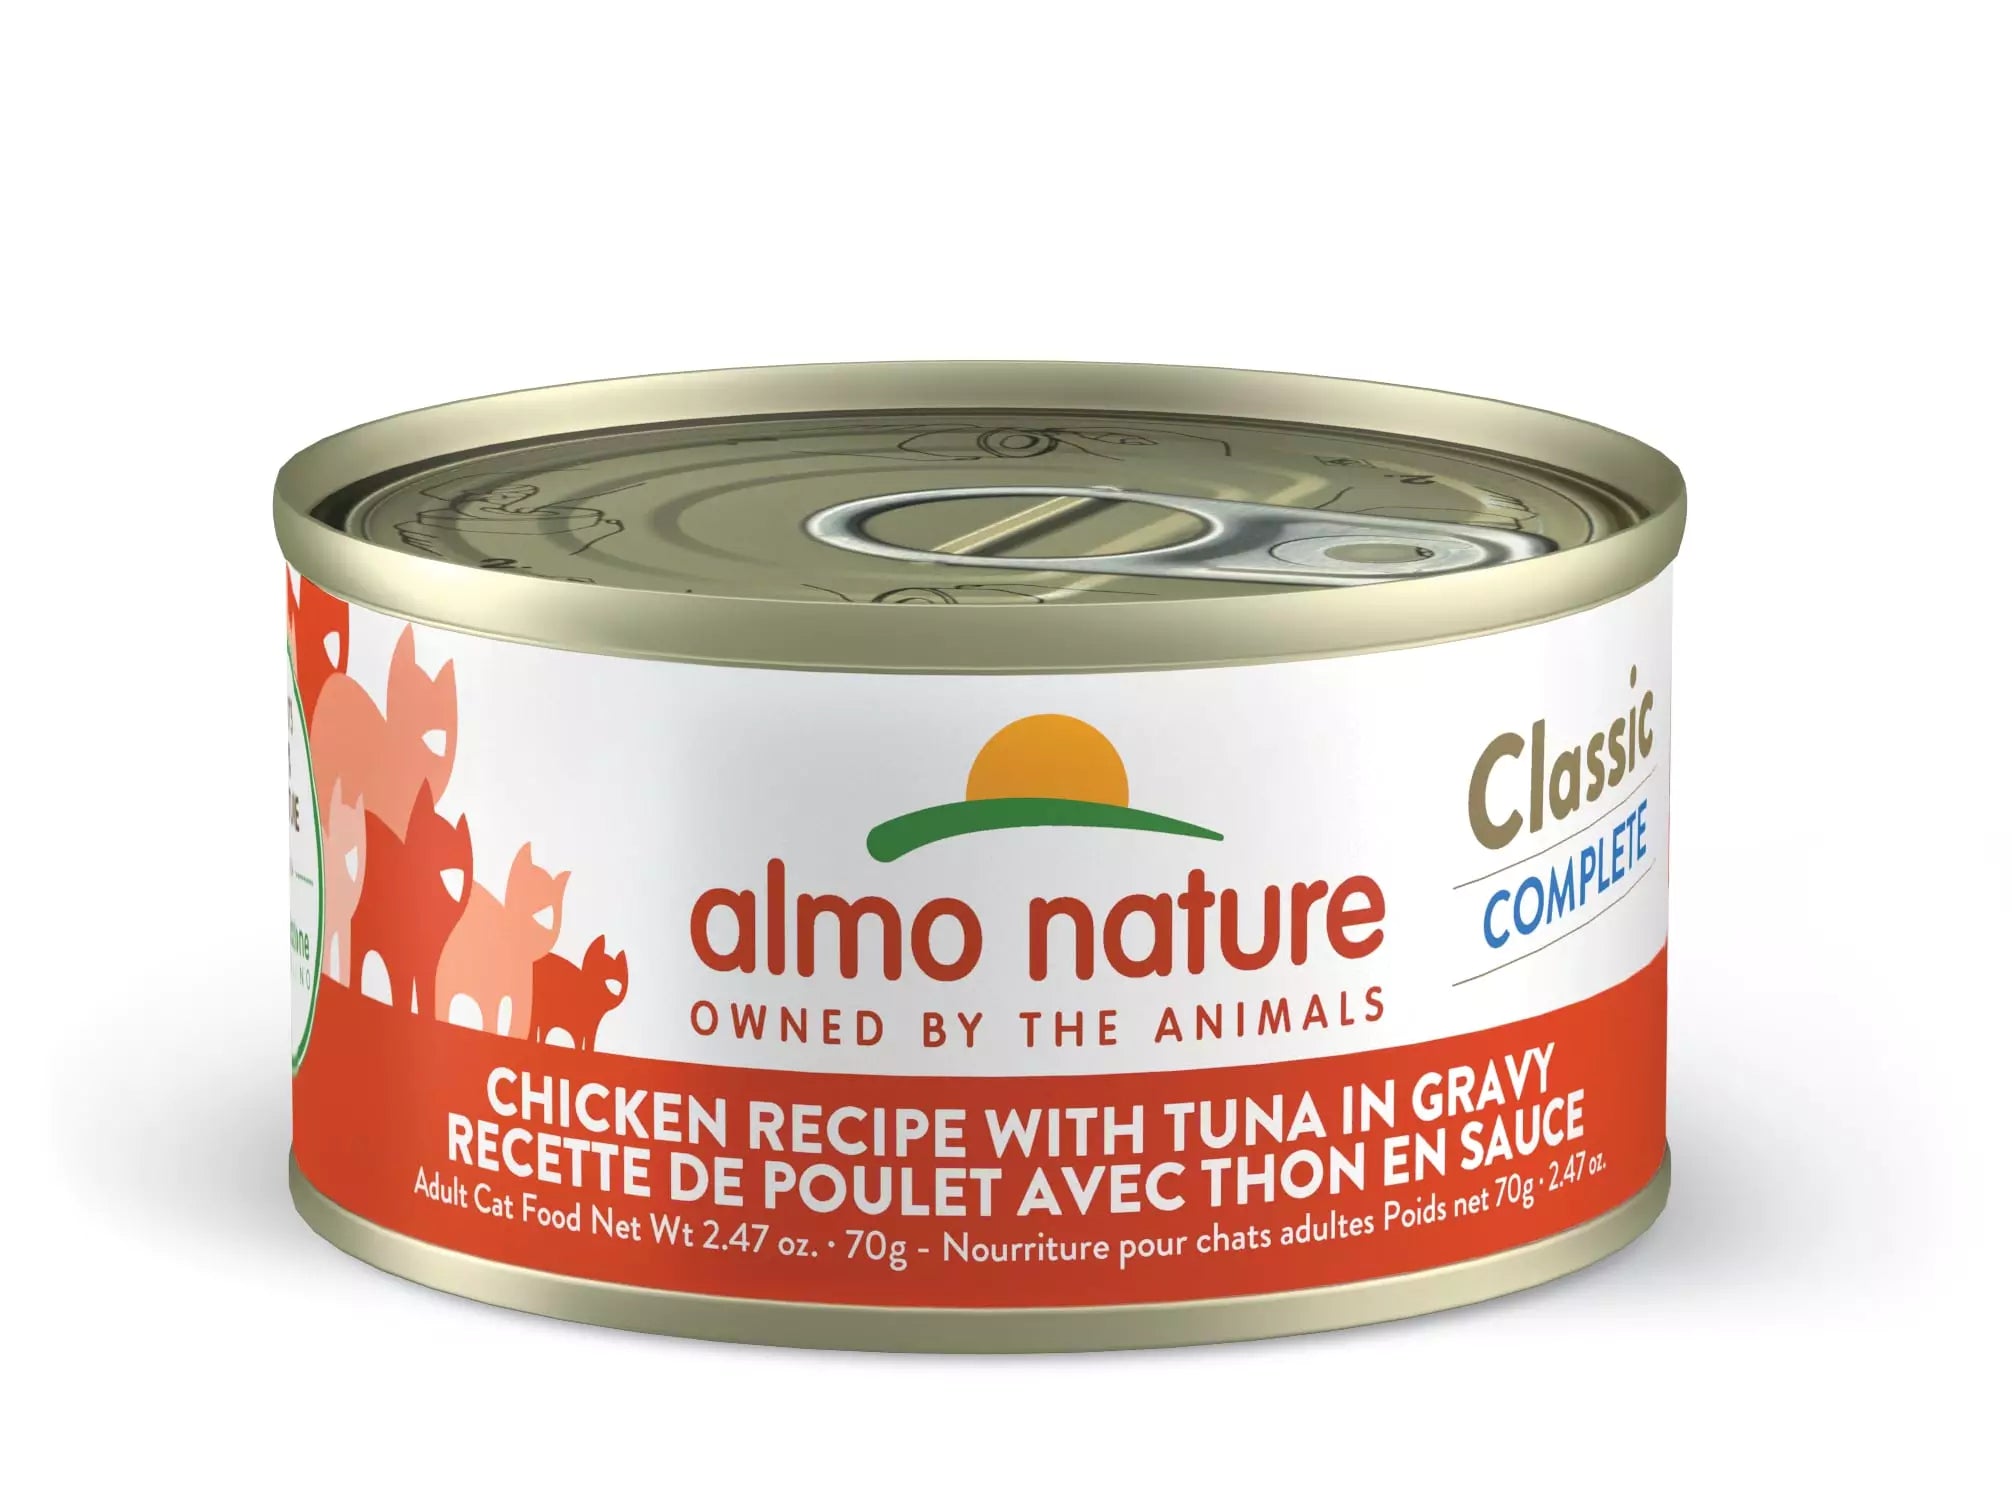 Almo Nature - Classic Complete - Chicken With Tuna in Gravy (Wet Cat Food)